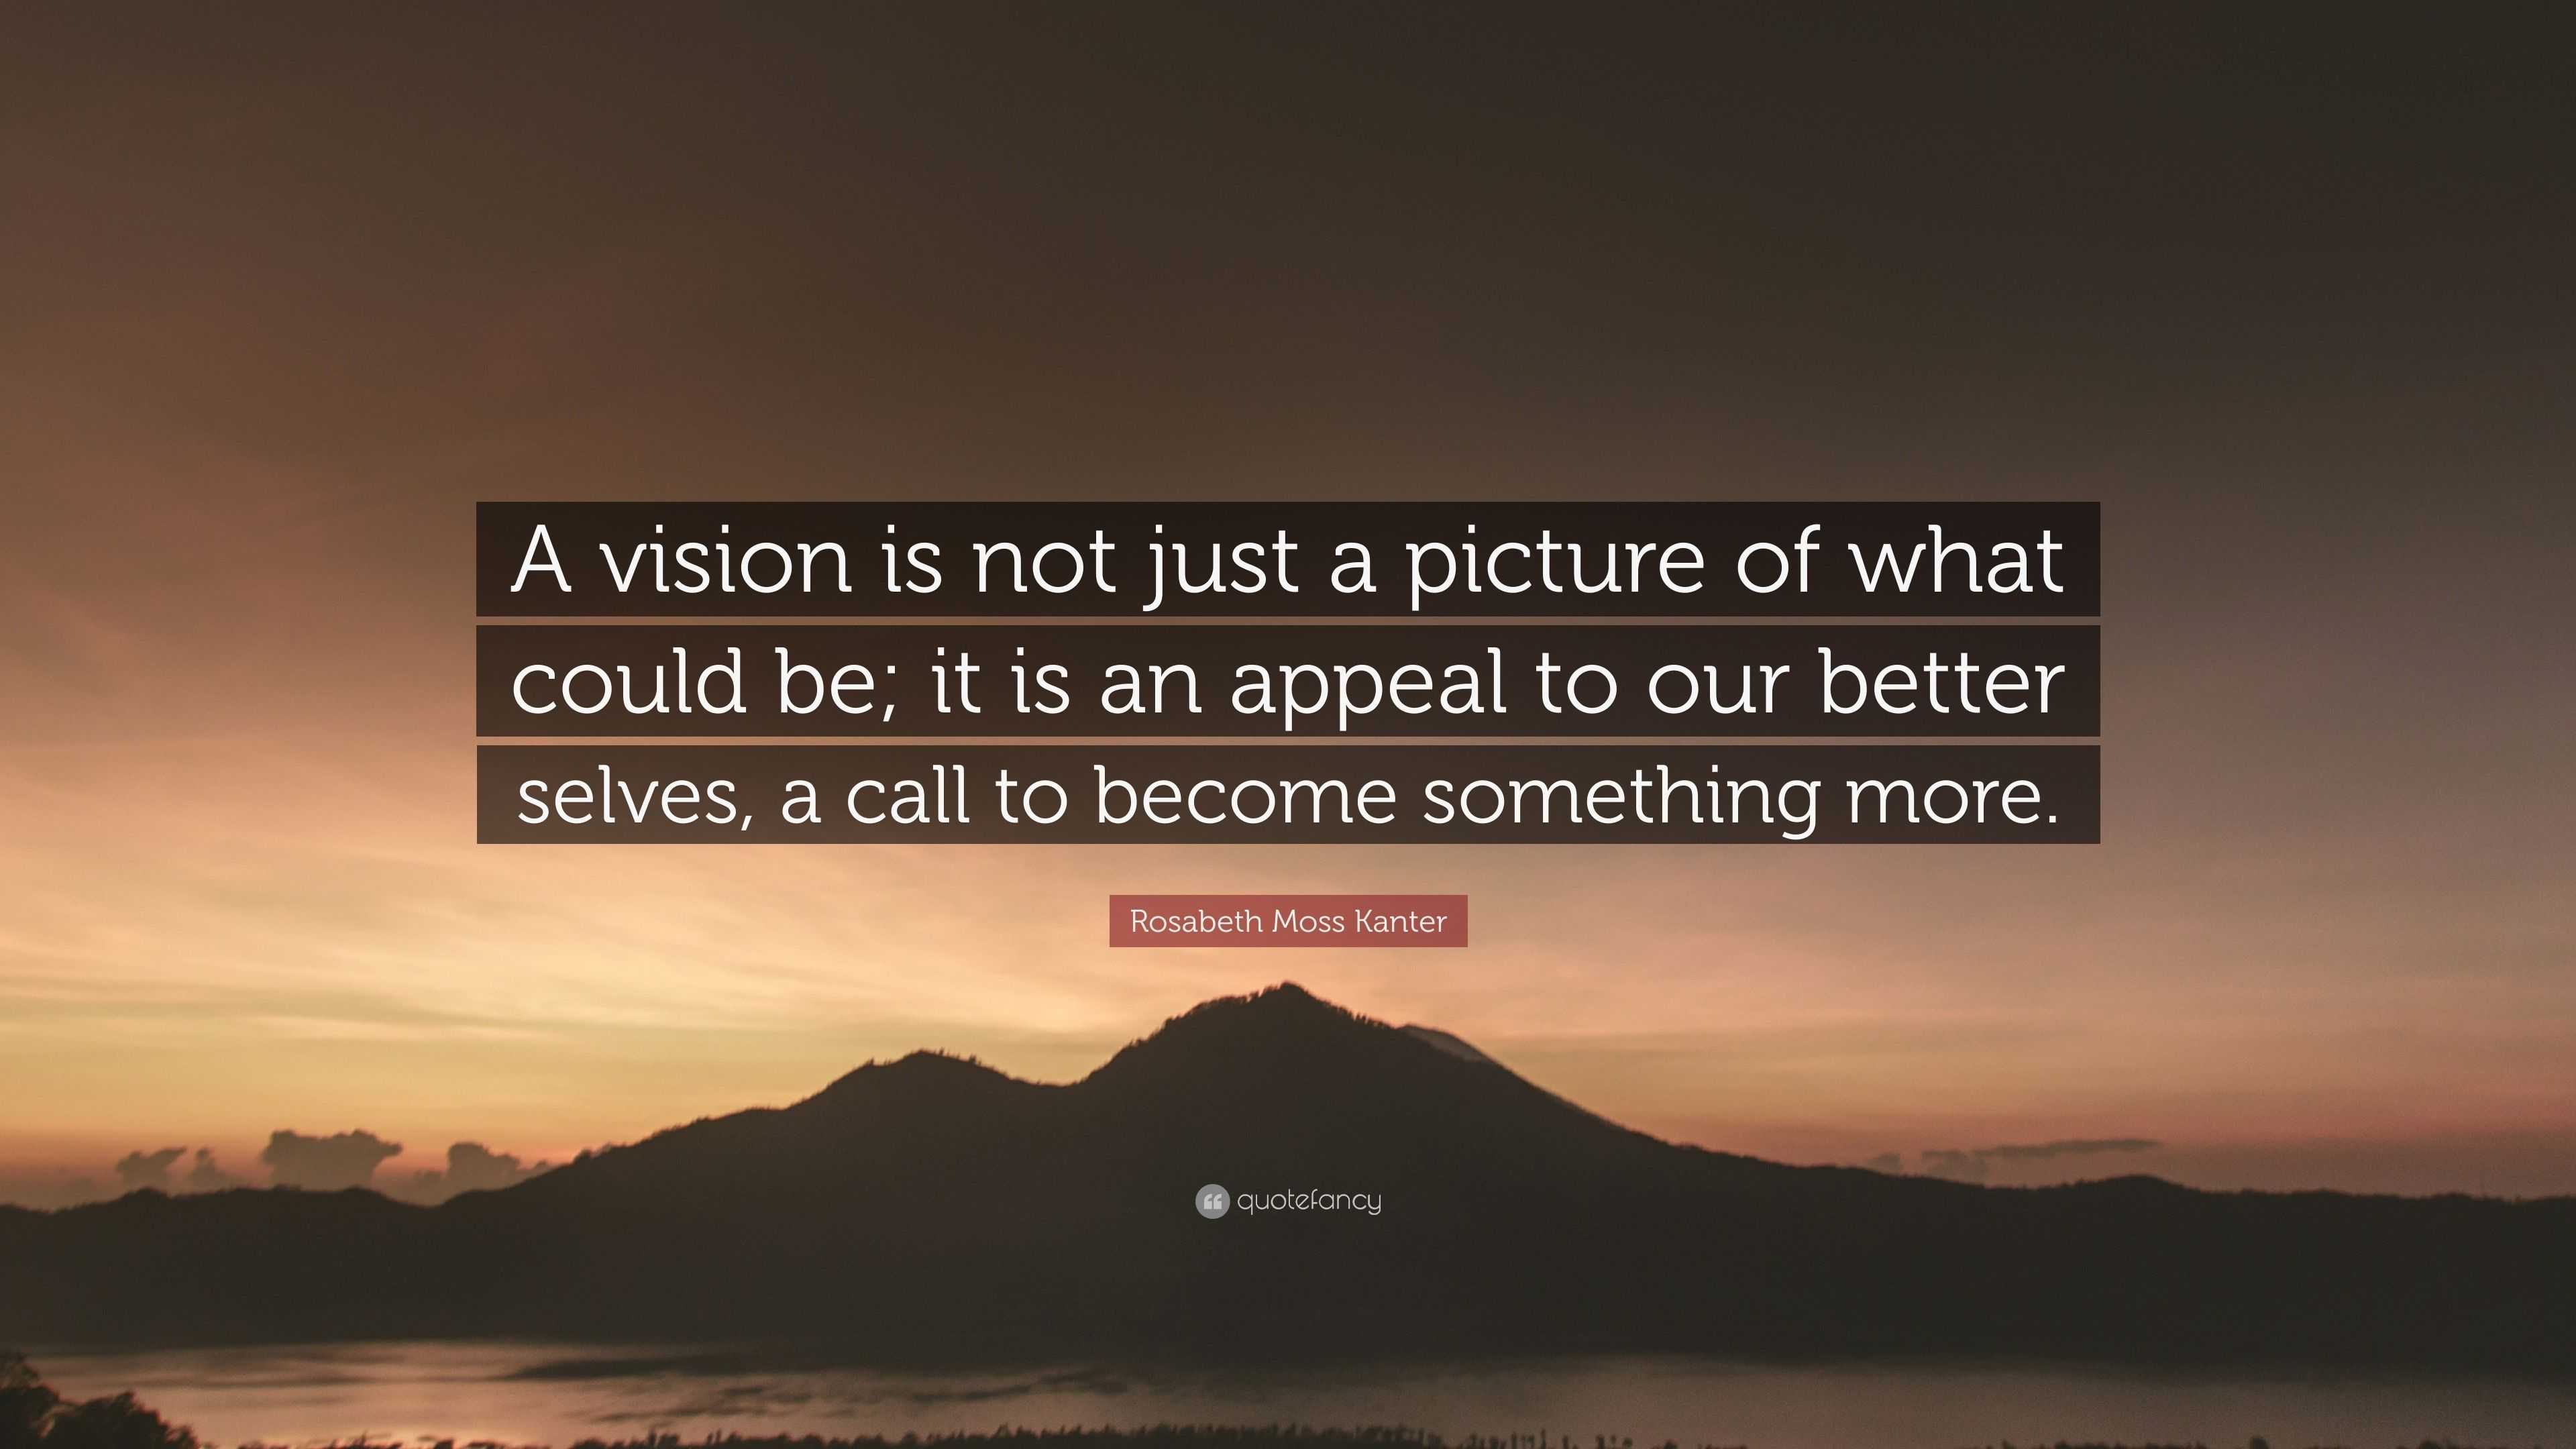 Rosabeth Moss Kanter Quote “A vision is not just a